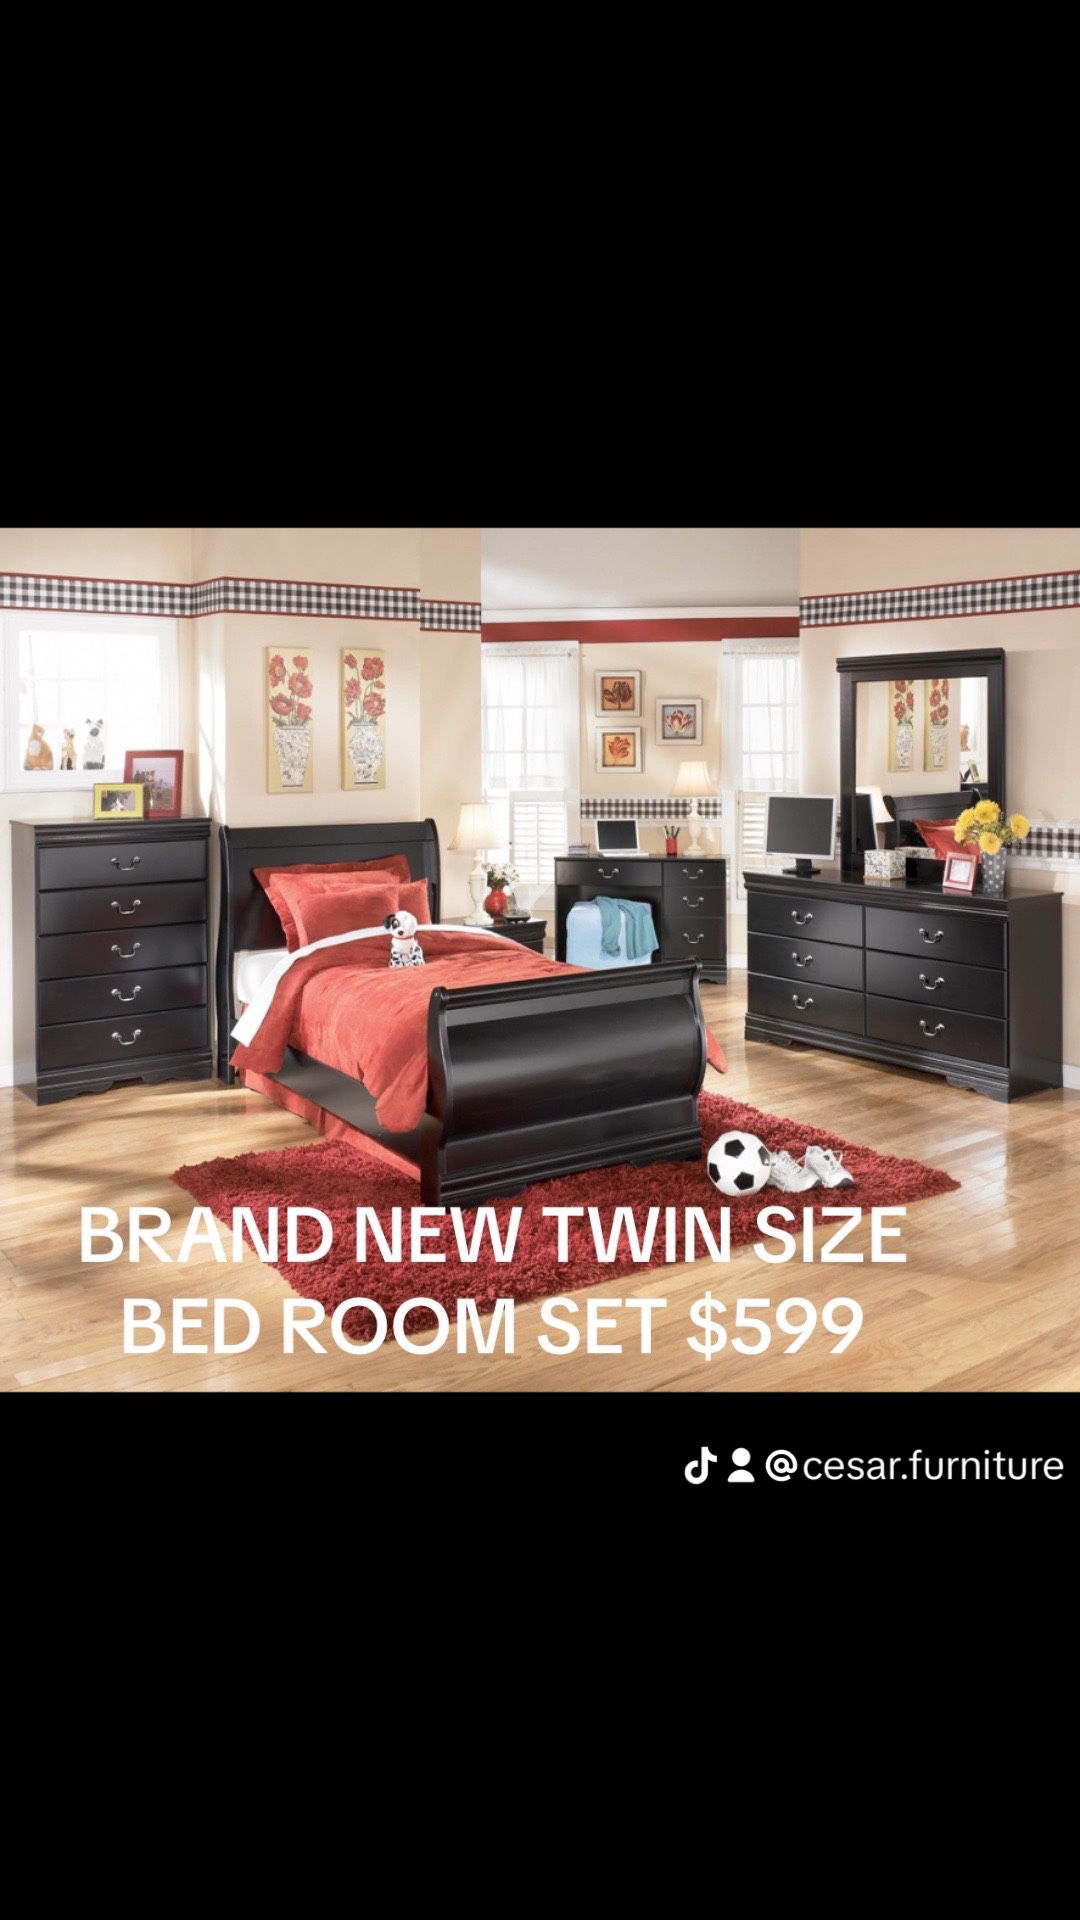 BRAND NEW TWIN SIZE BED ROOM SET 